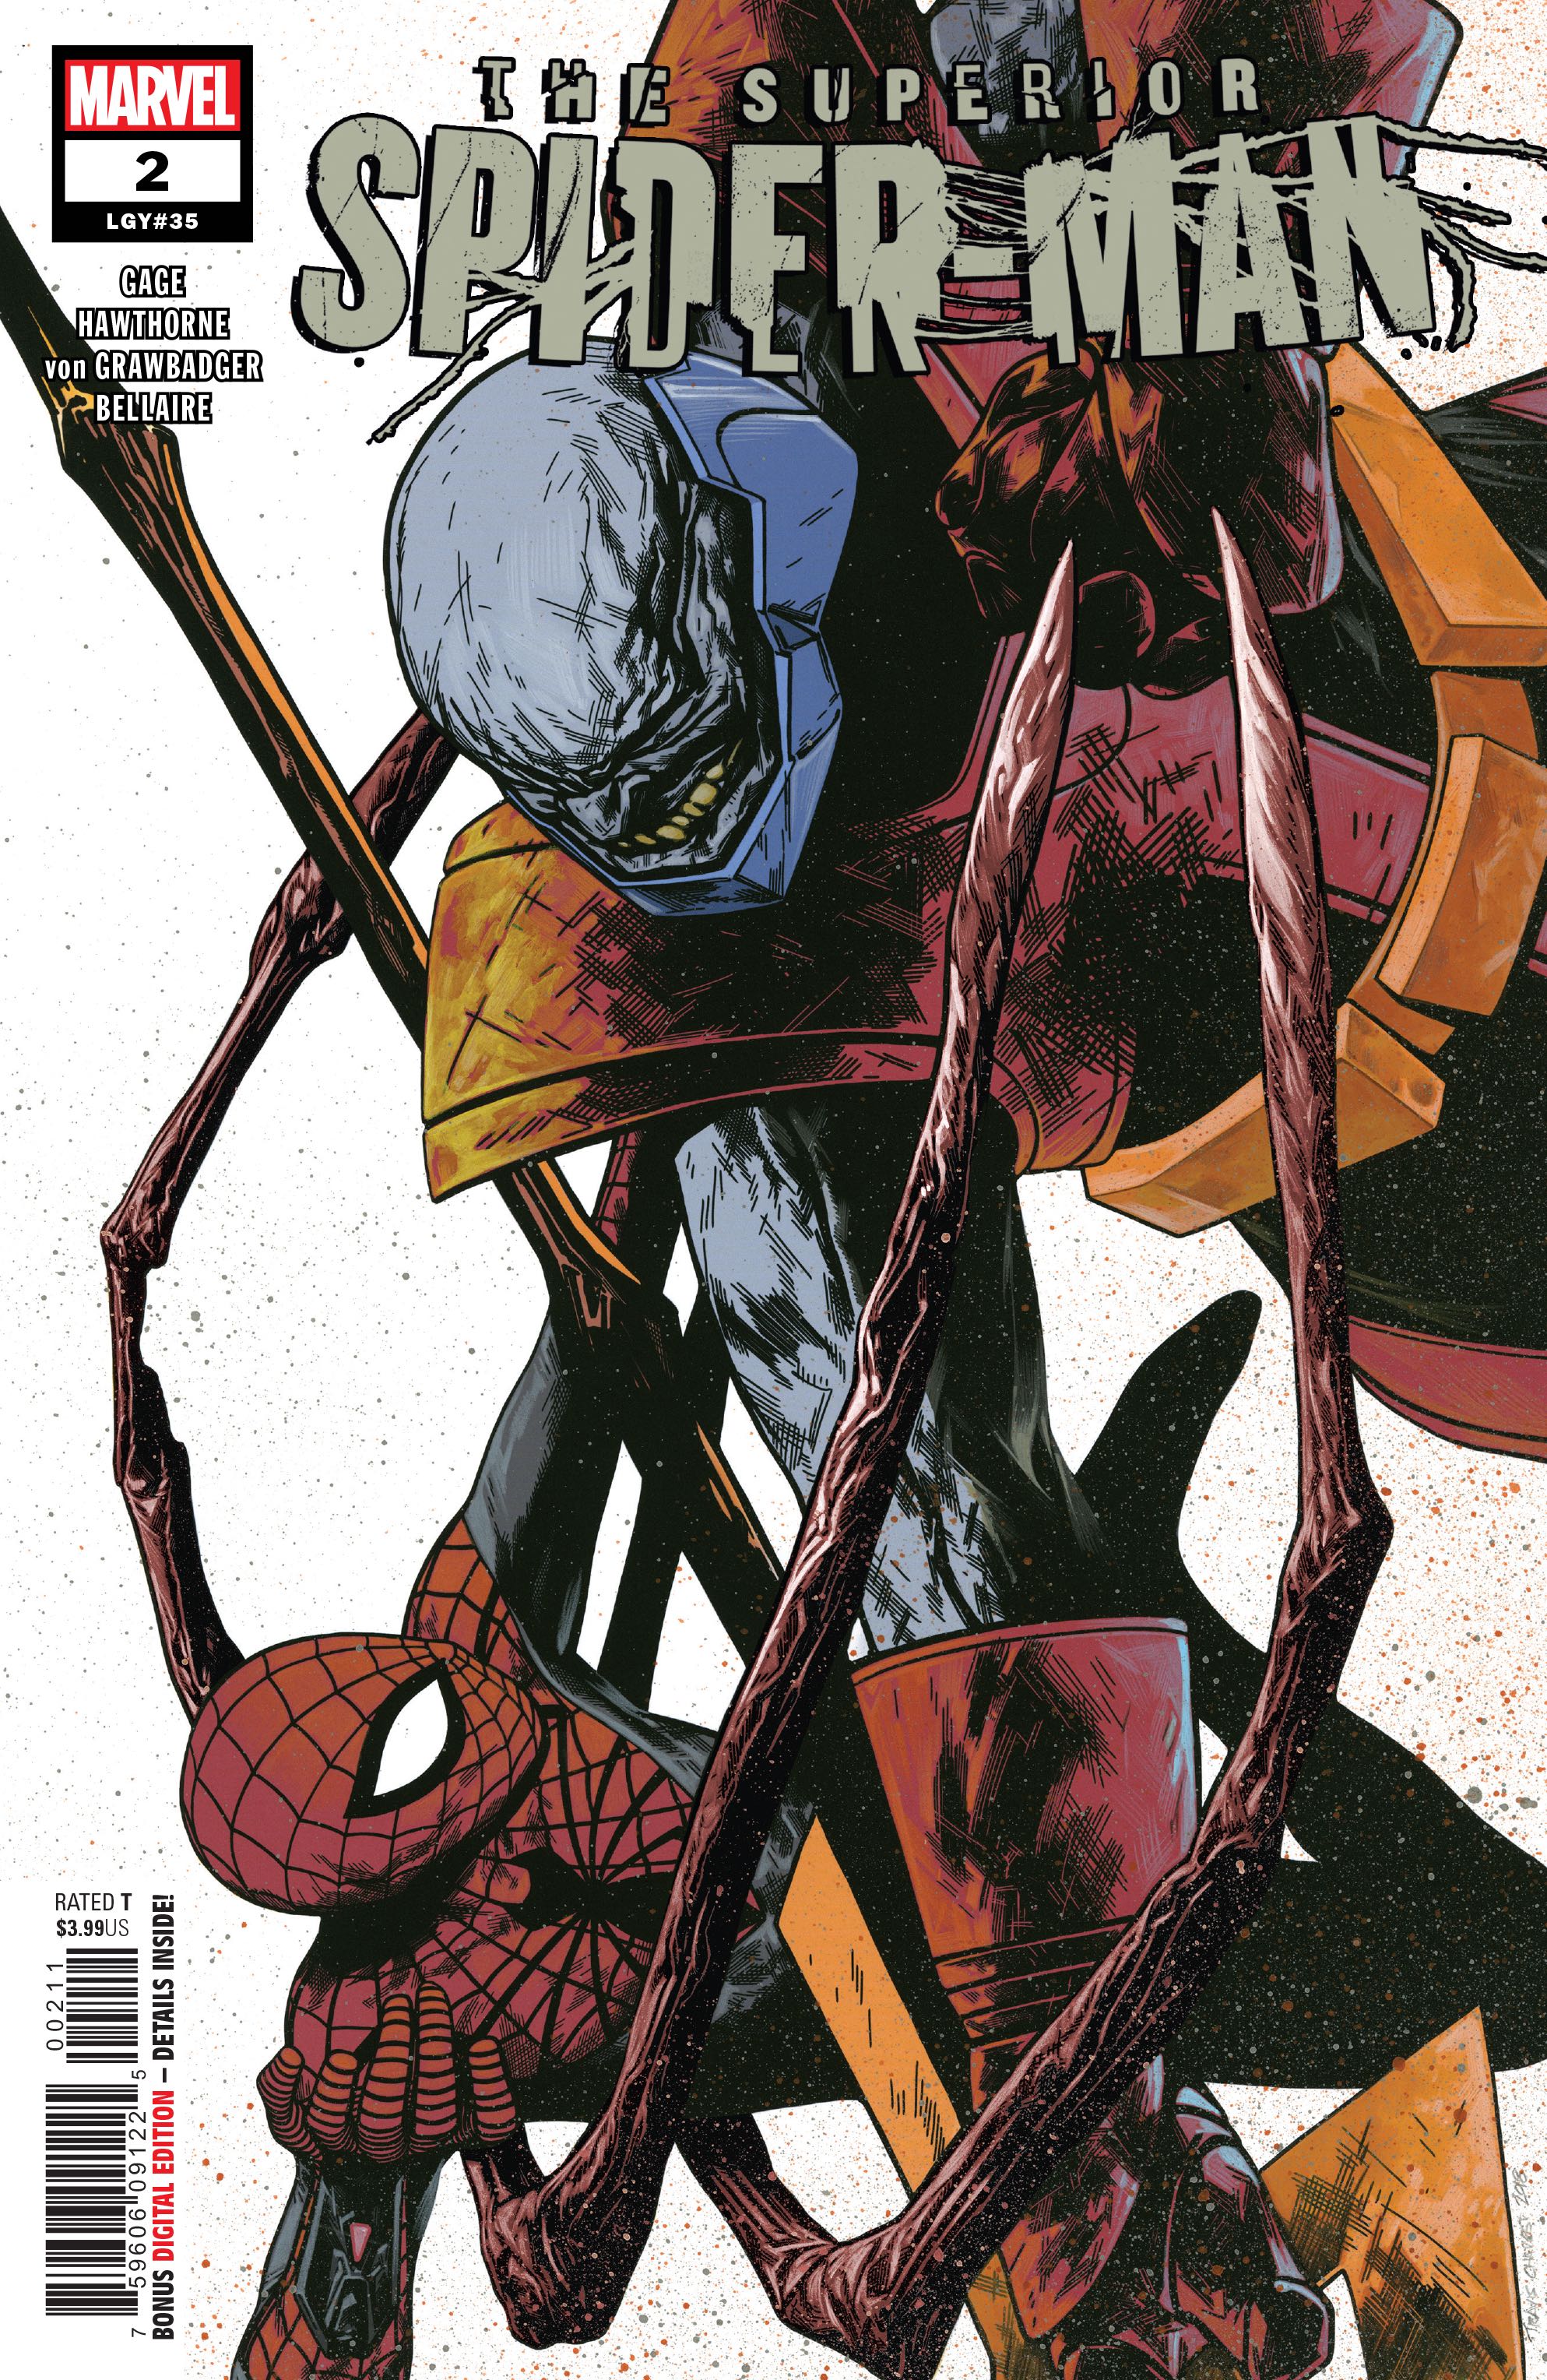 Marvel Preview: The Superior Spider-Man #2